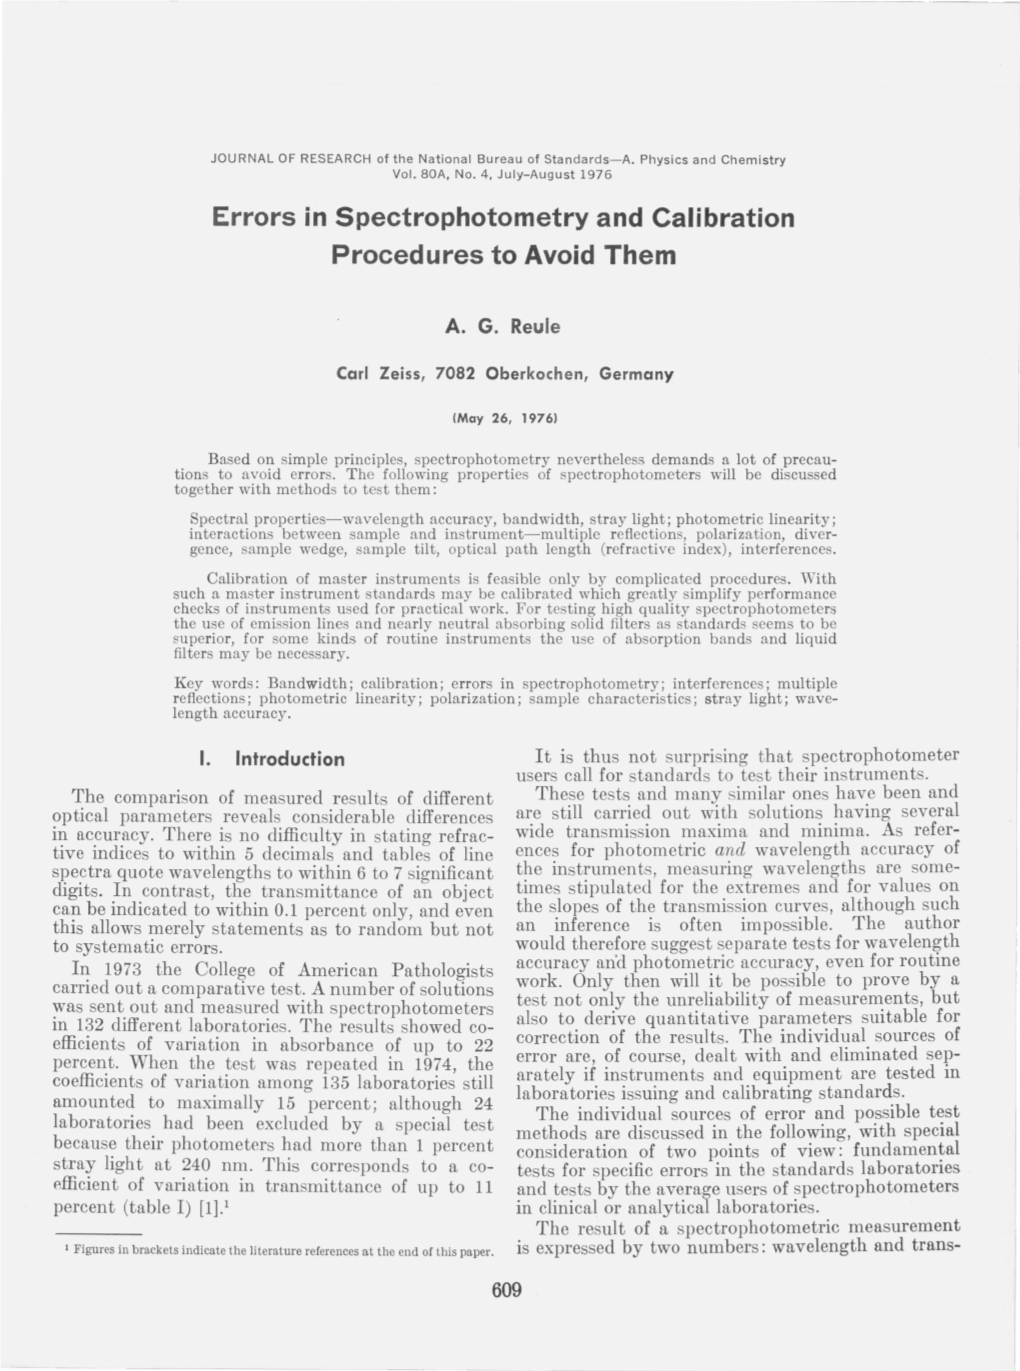 Errors in Spectrophotometry and Calibration Procedures to Avoid Them